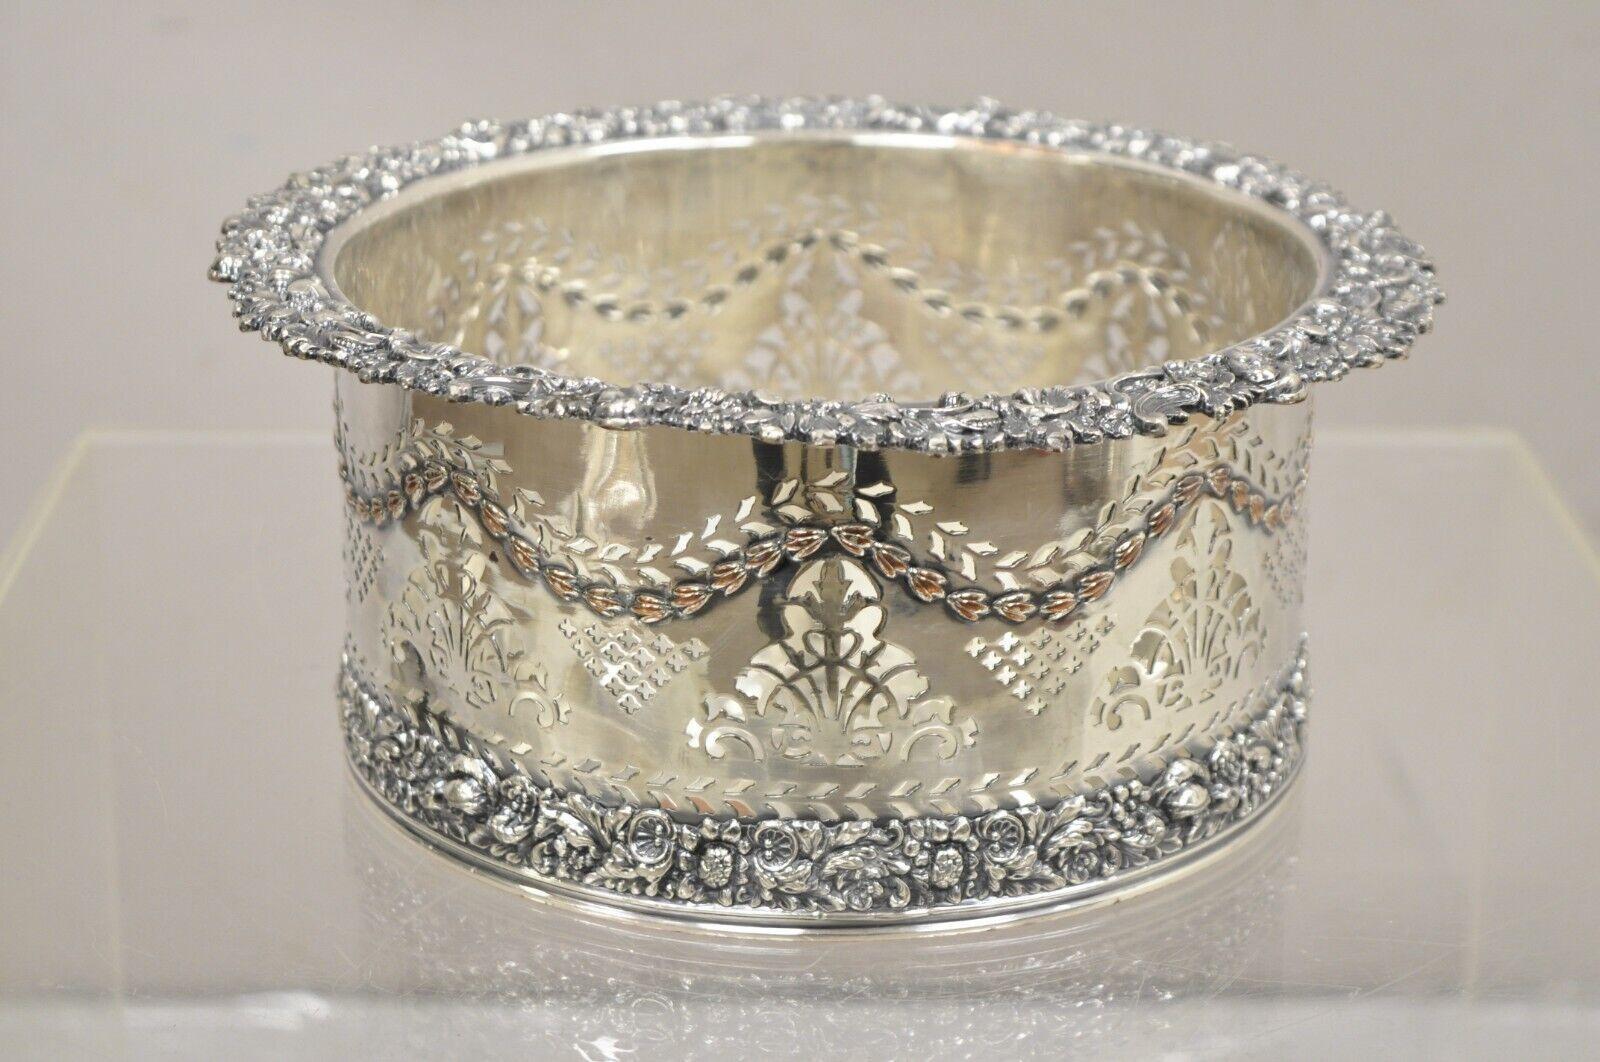 English Sheffield Sterling Silver Mounted Silver Plated Champagne Bottle Coaster. Item features floral pierced design with flower repoussé to base and rim, original hallmark, very nice antique item. Circa Early 1900s
Measurements:  4.5